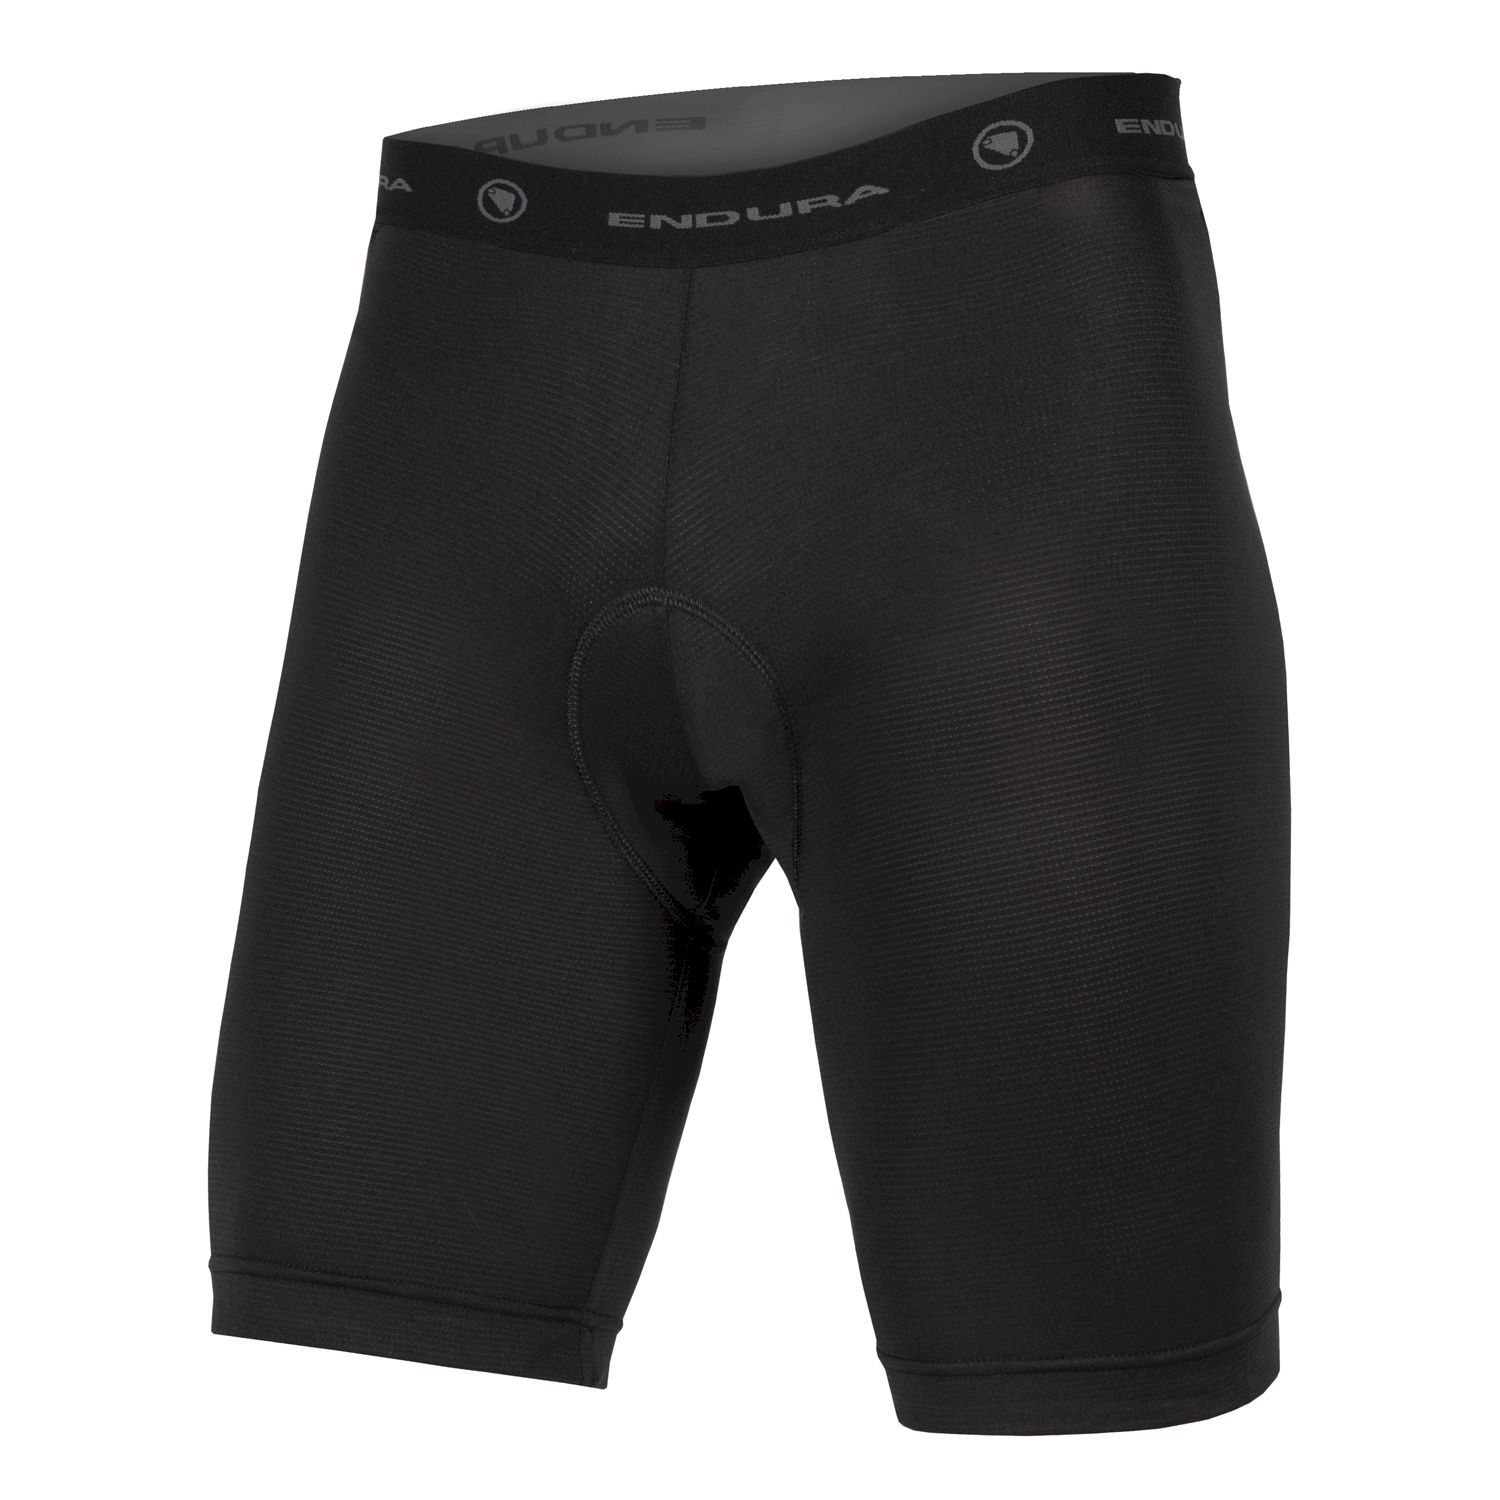 Endura Padded Liner II - Ropa interior ciclismo - Hombre